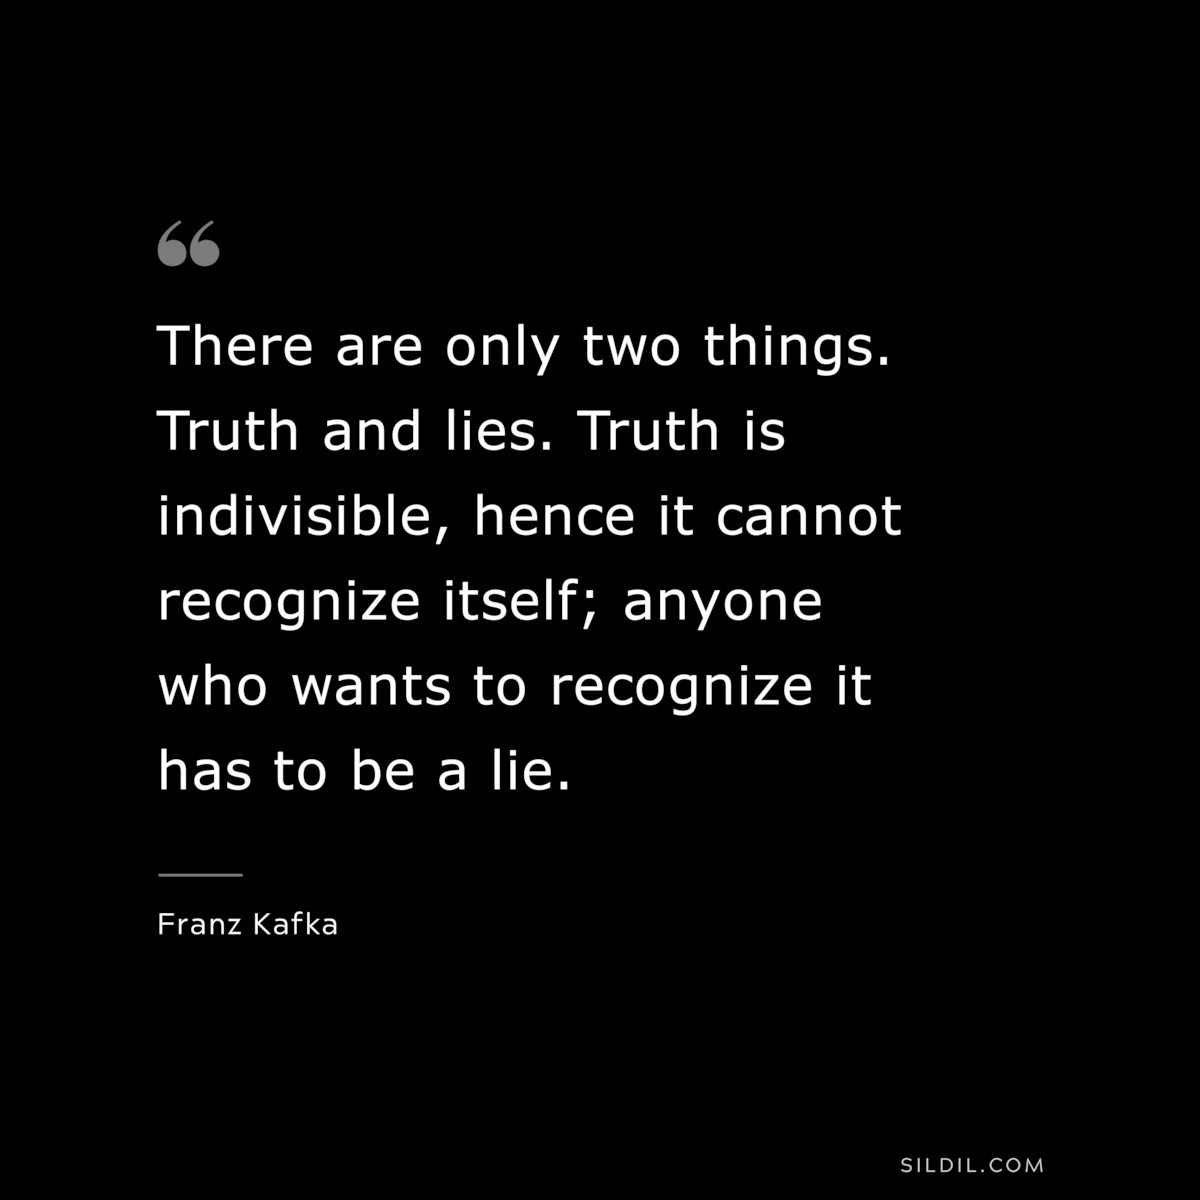 There are only two things. Truth and lies. Truth is indivisible, hence it cannot recognize itself; anyone who wants to recognize it has to be a lie. ― Franz Kafka